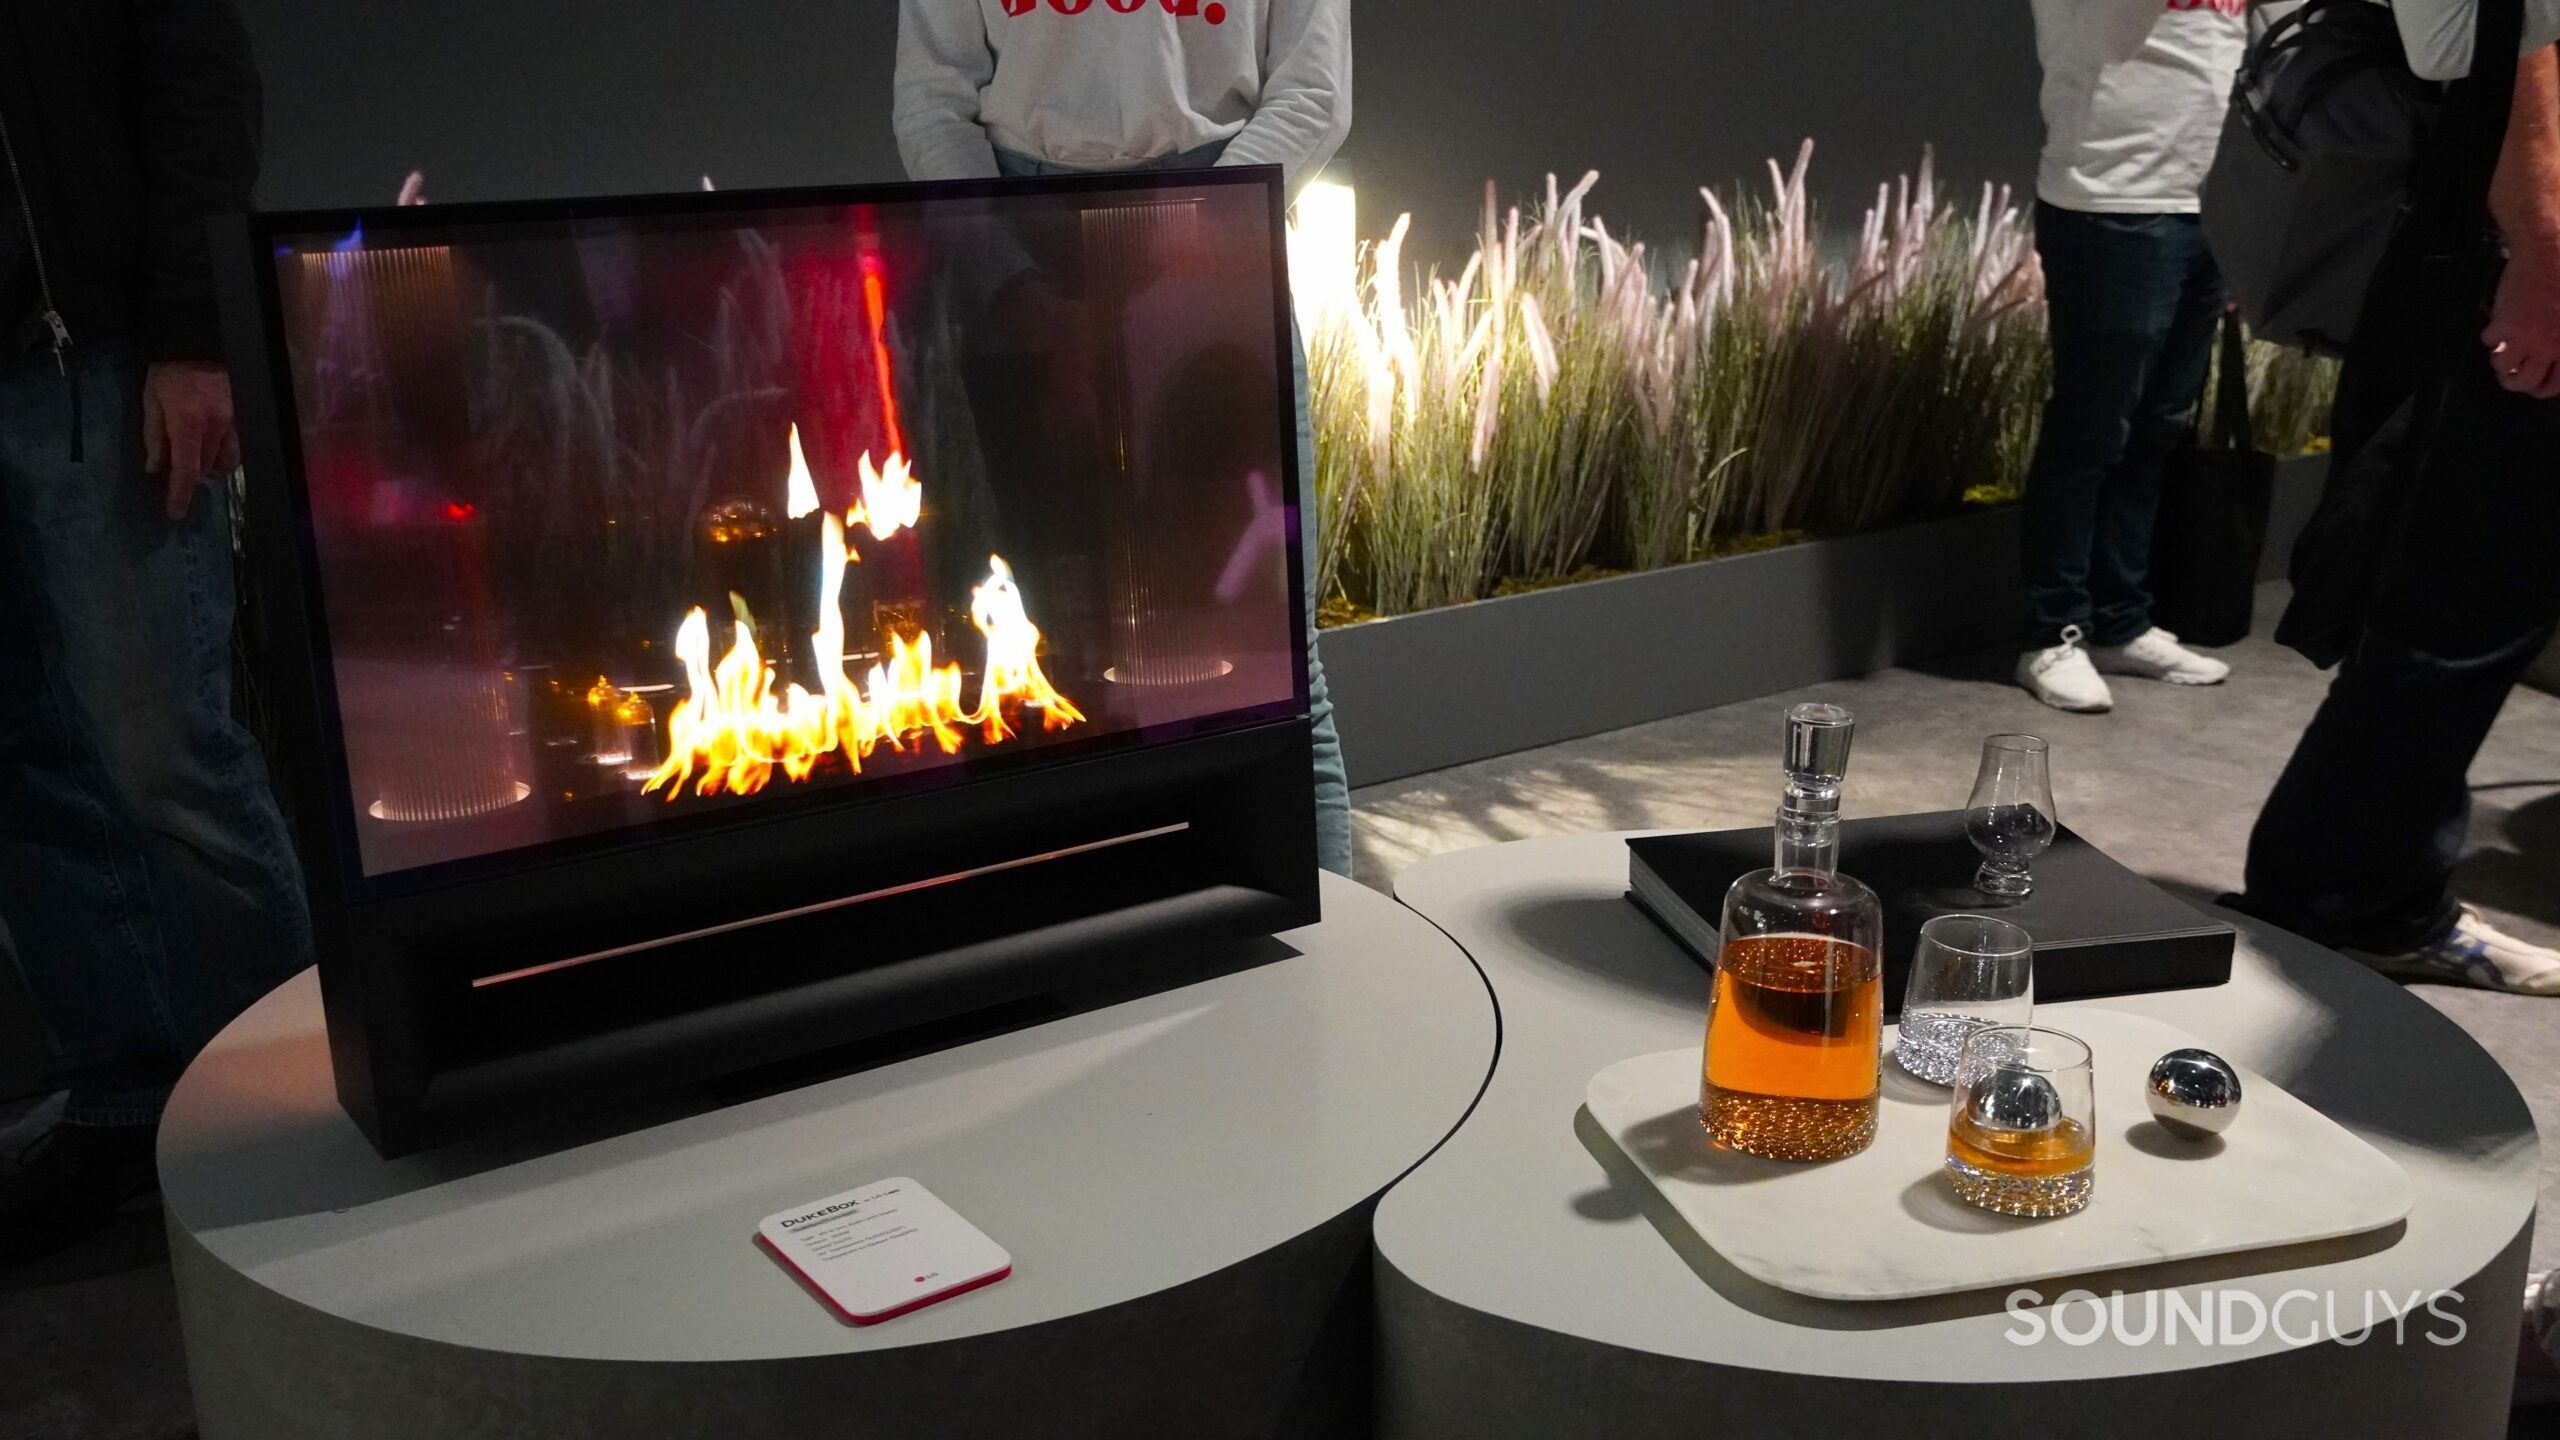 LG DukeBox fireplace on screen with whiskey and glasses